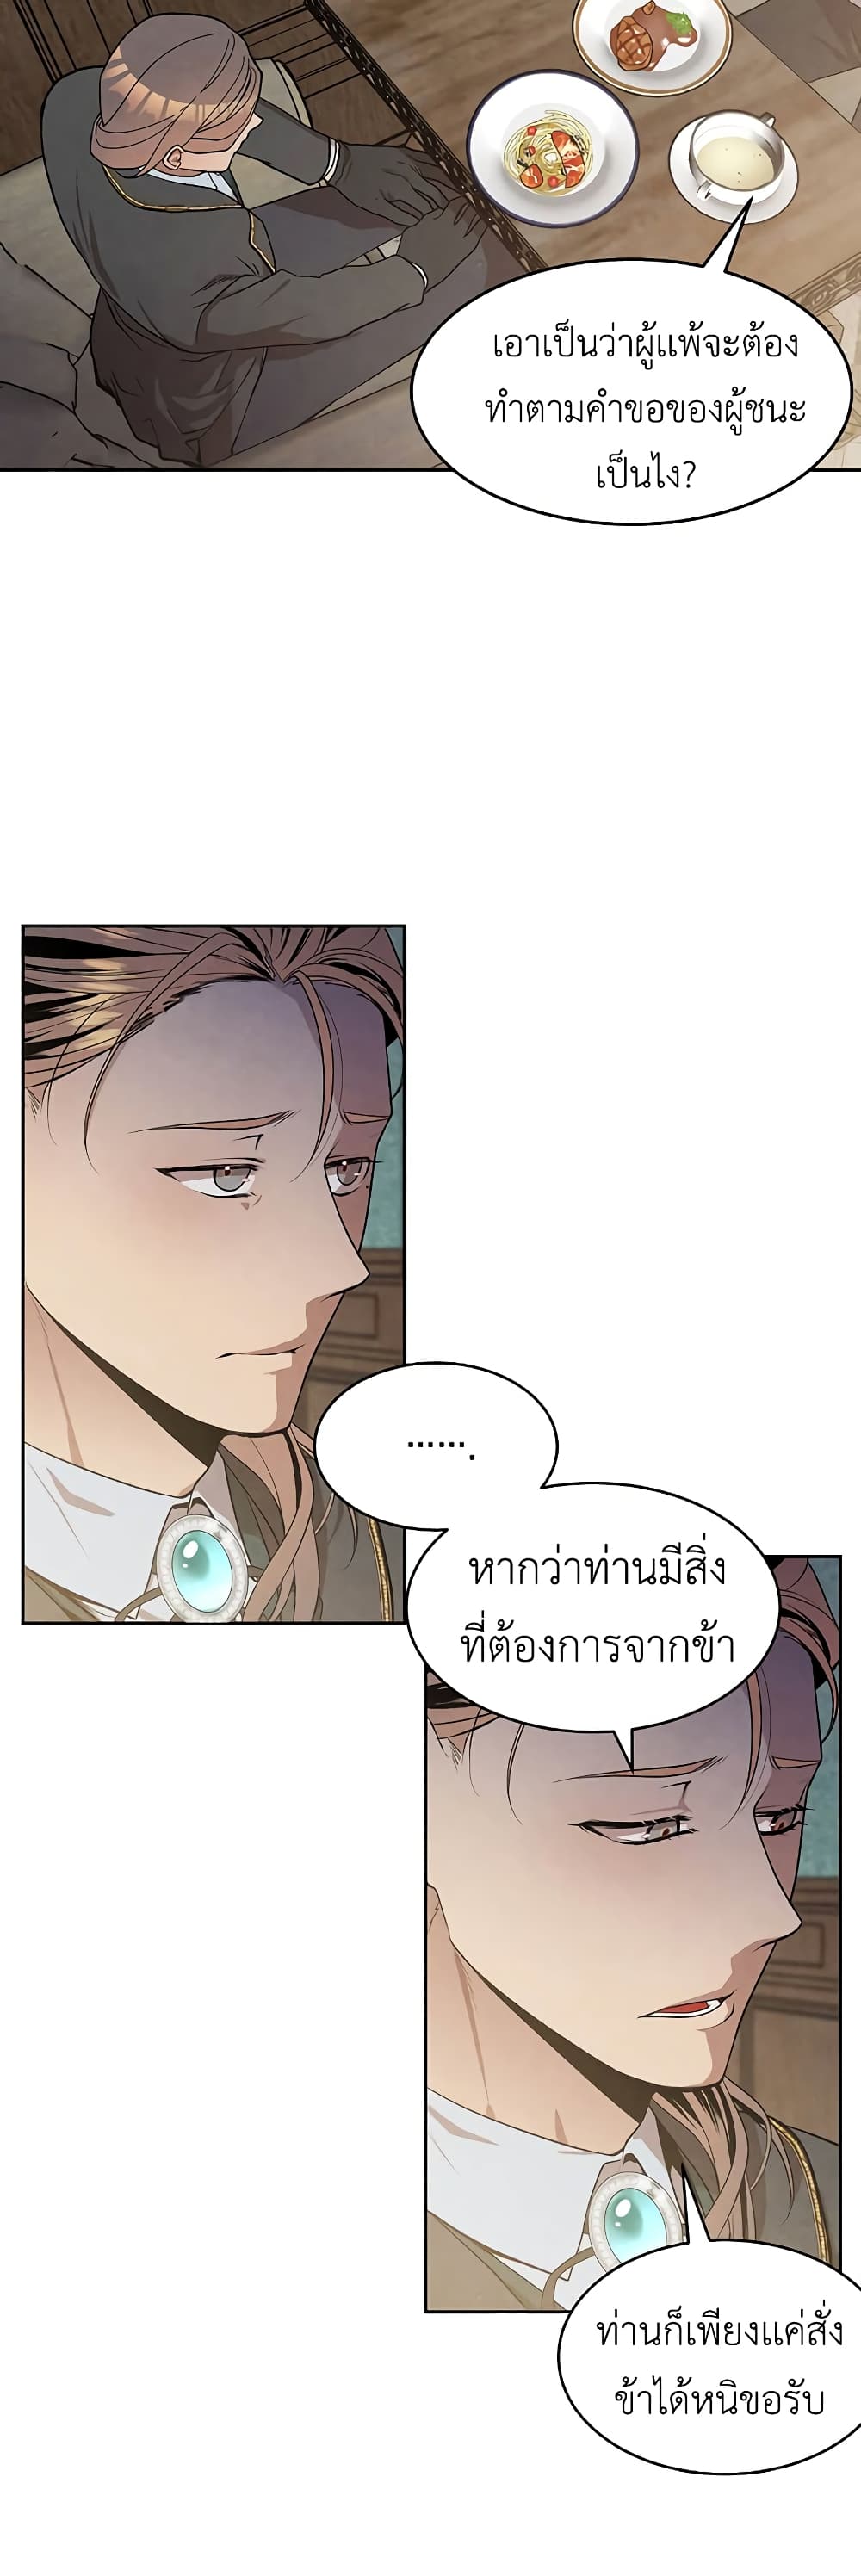 Legendary Youngest Son of the Marquis House 12 แปลไทย